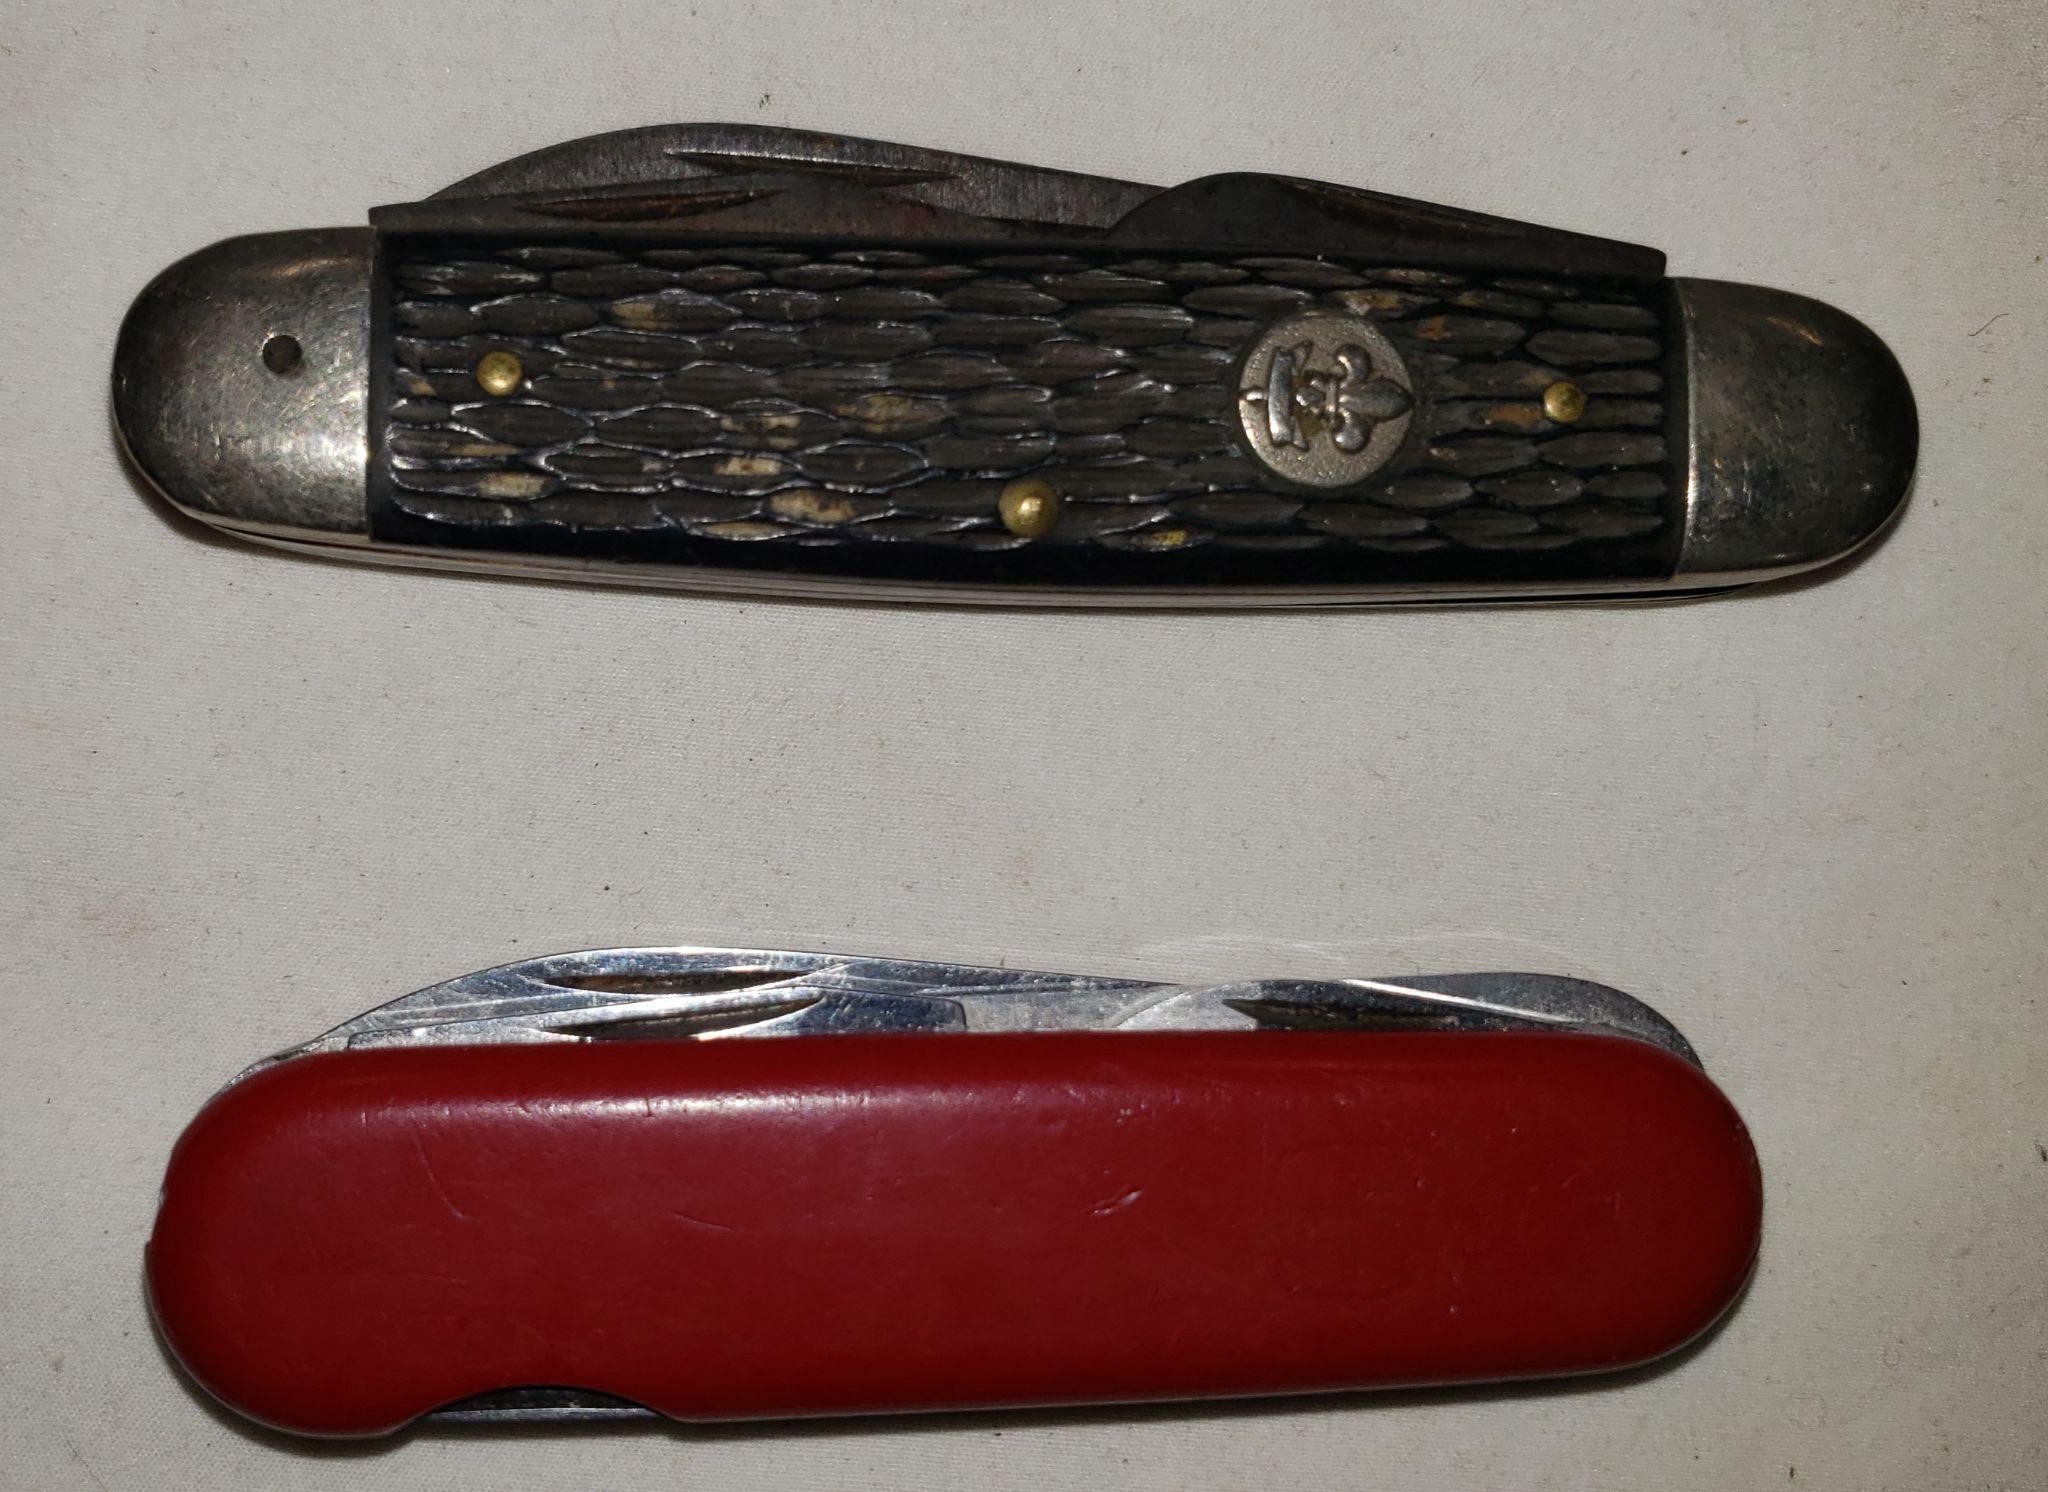 Swiss Army Knife and Other Vintage Ulster Knife